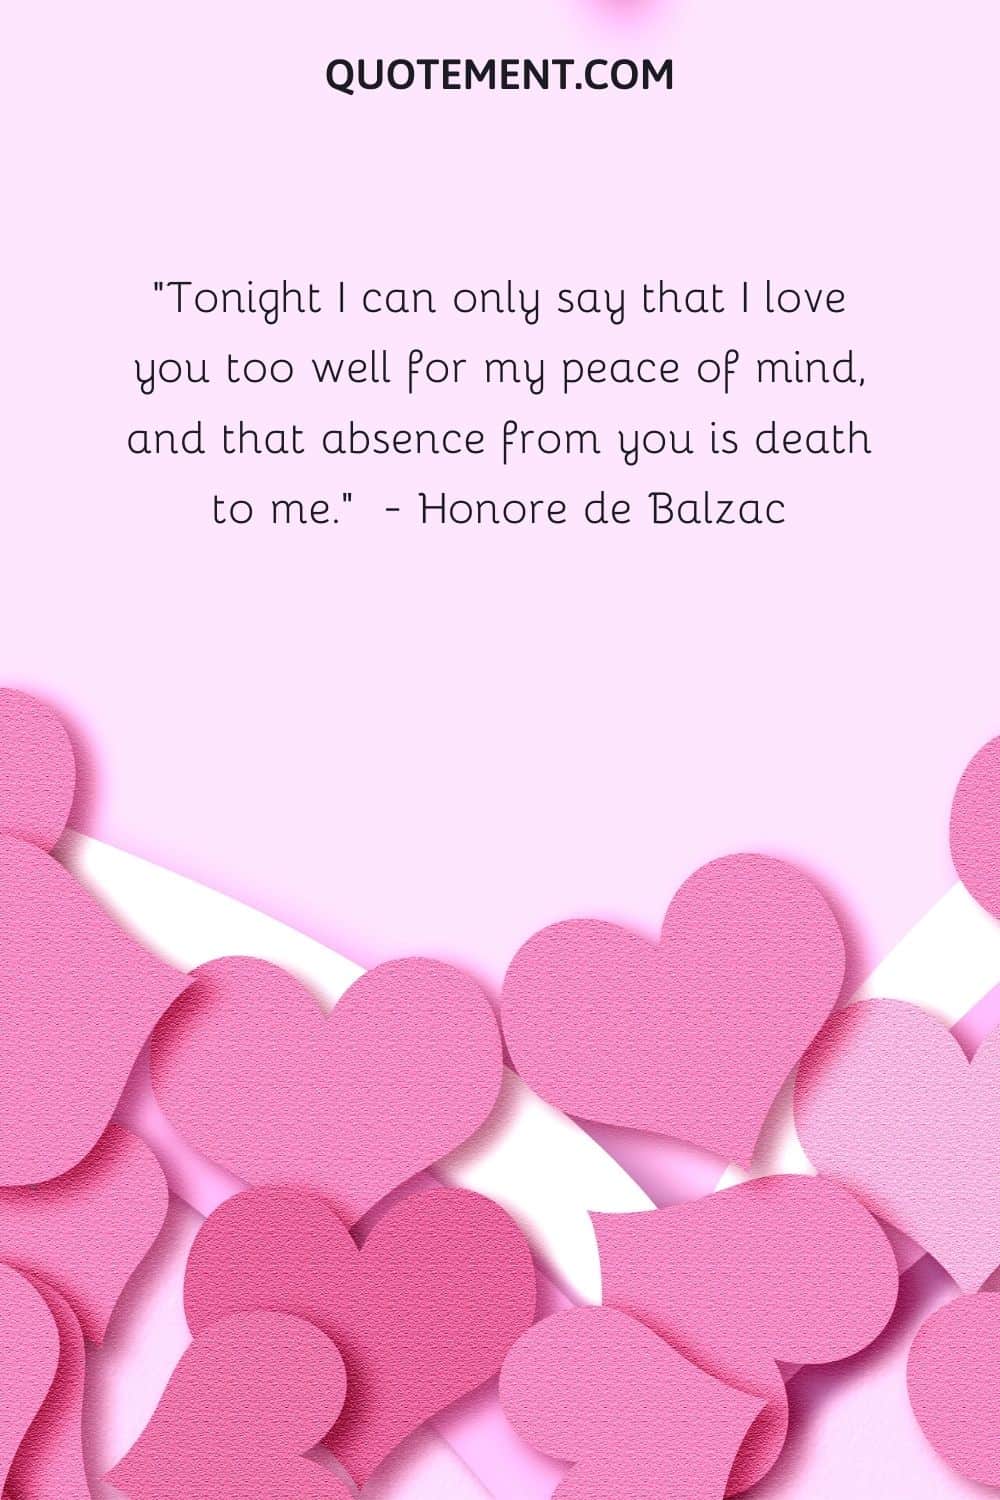 Tonight I can only say that I love you too well for my peace of mind, and that absence from you is death to me. — Honore de Balzac